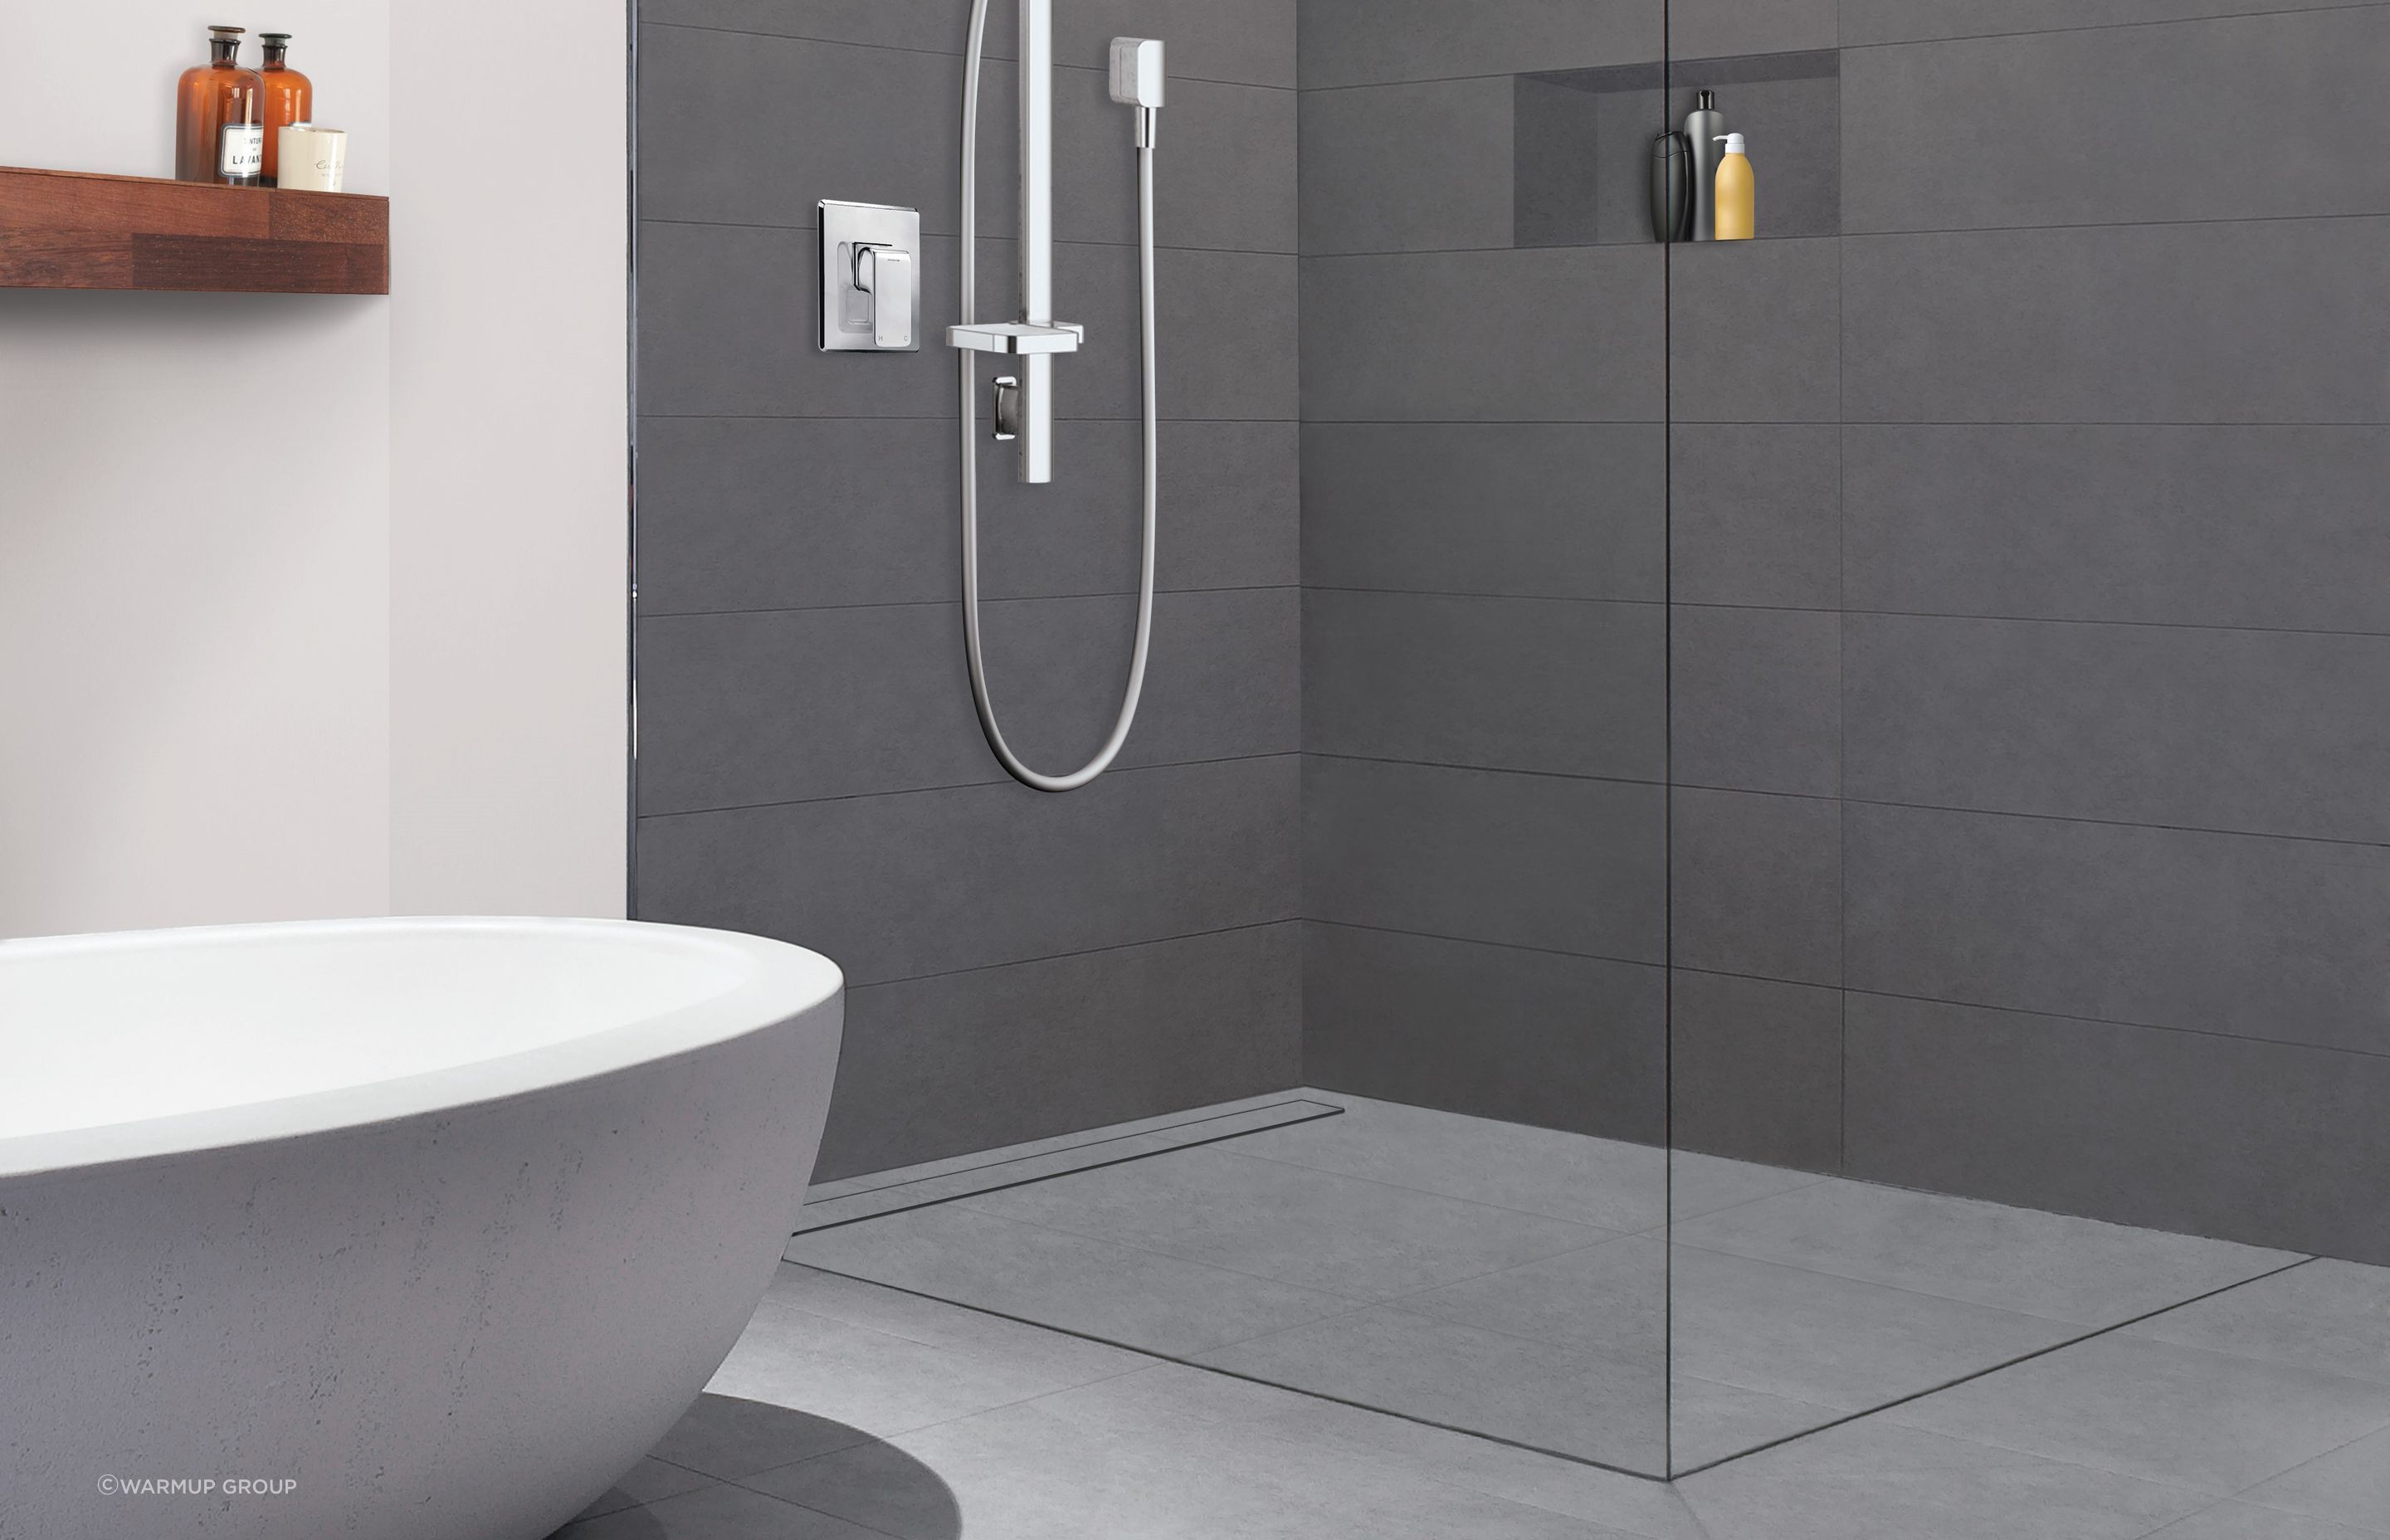 Shower Trays, All About Shower Trays, What Shower Tray Is Best?, Best Shower  Trays, Best Shower Tray Material, What You Need to Know About Shower Trays